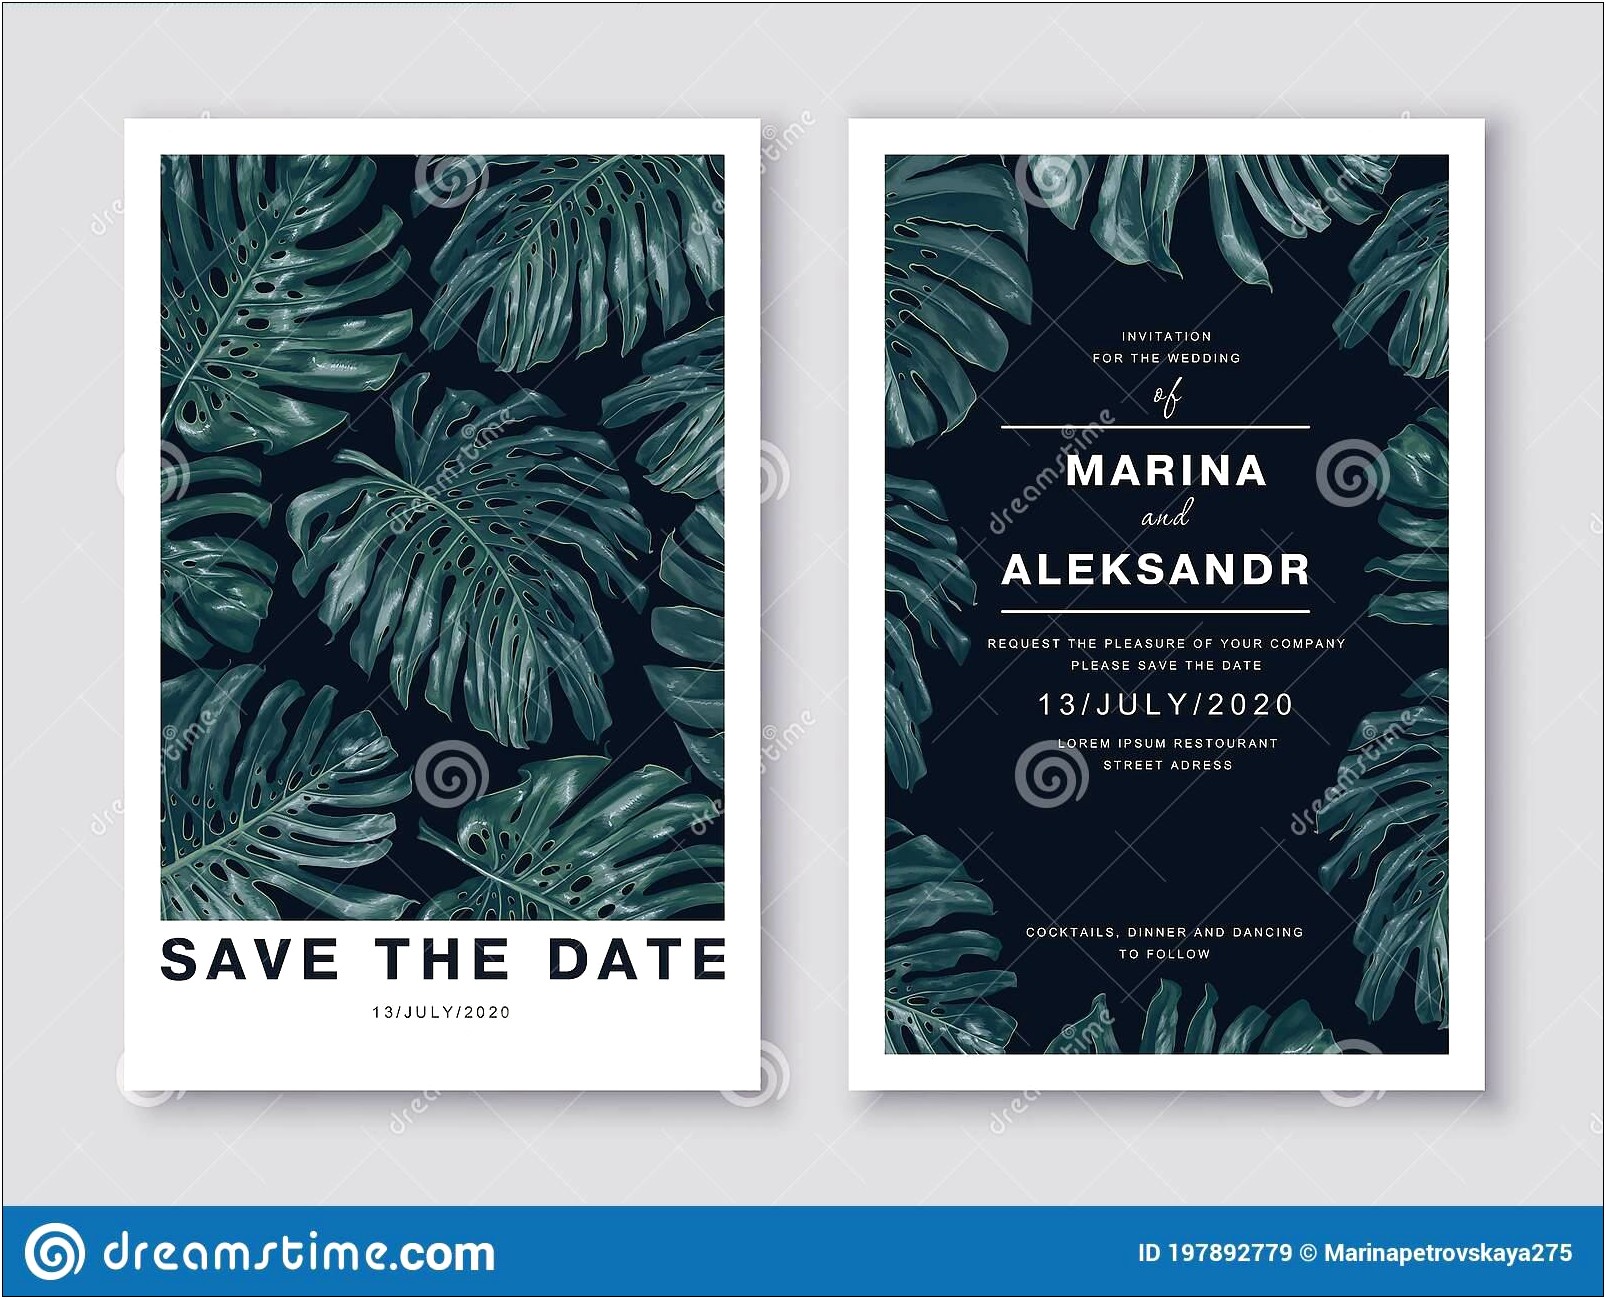 Save The Date Business Dinner Postcard Template Free